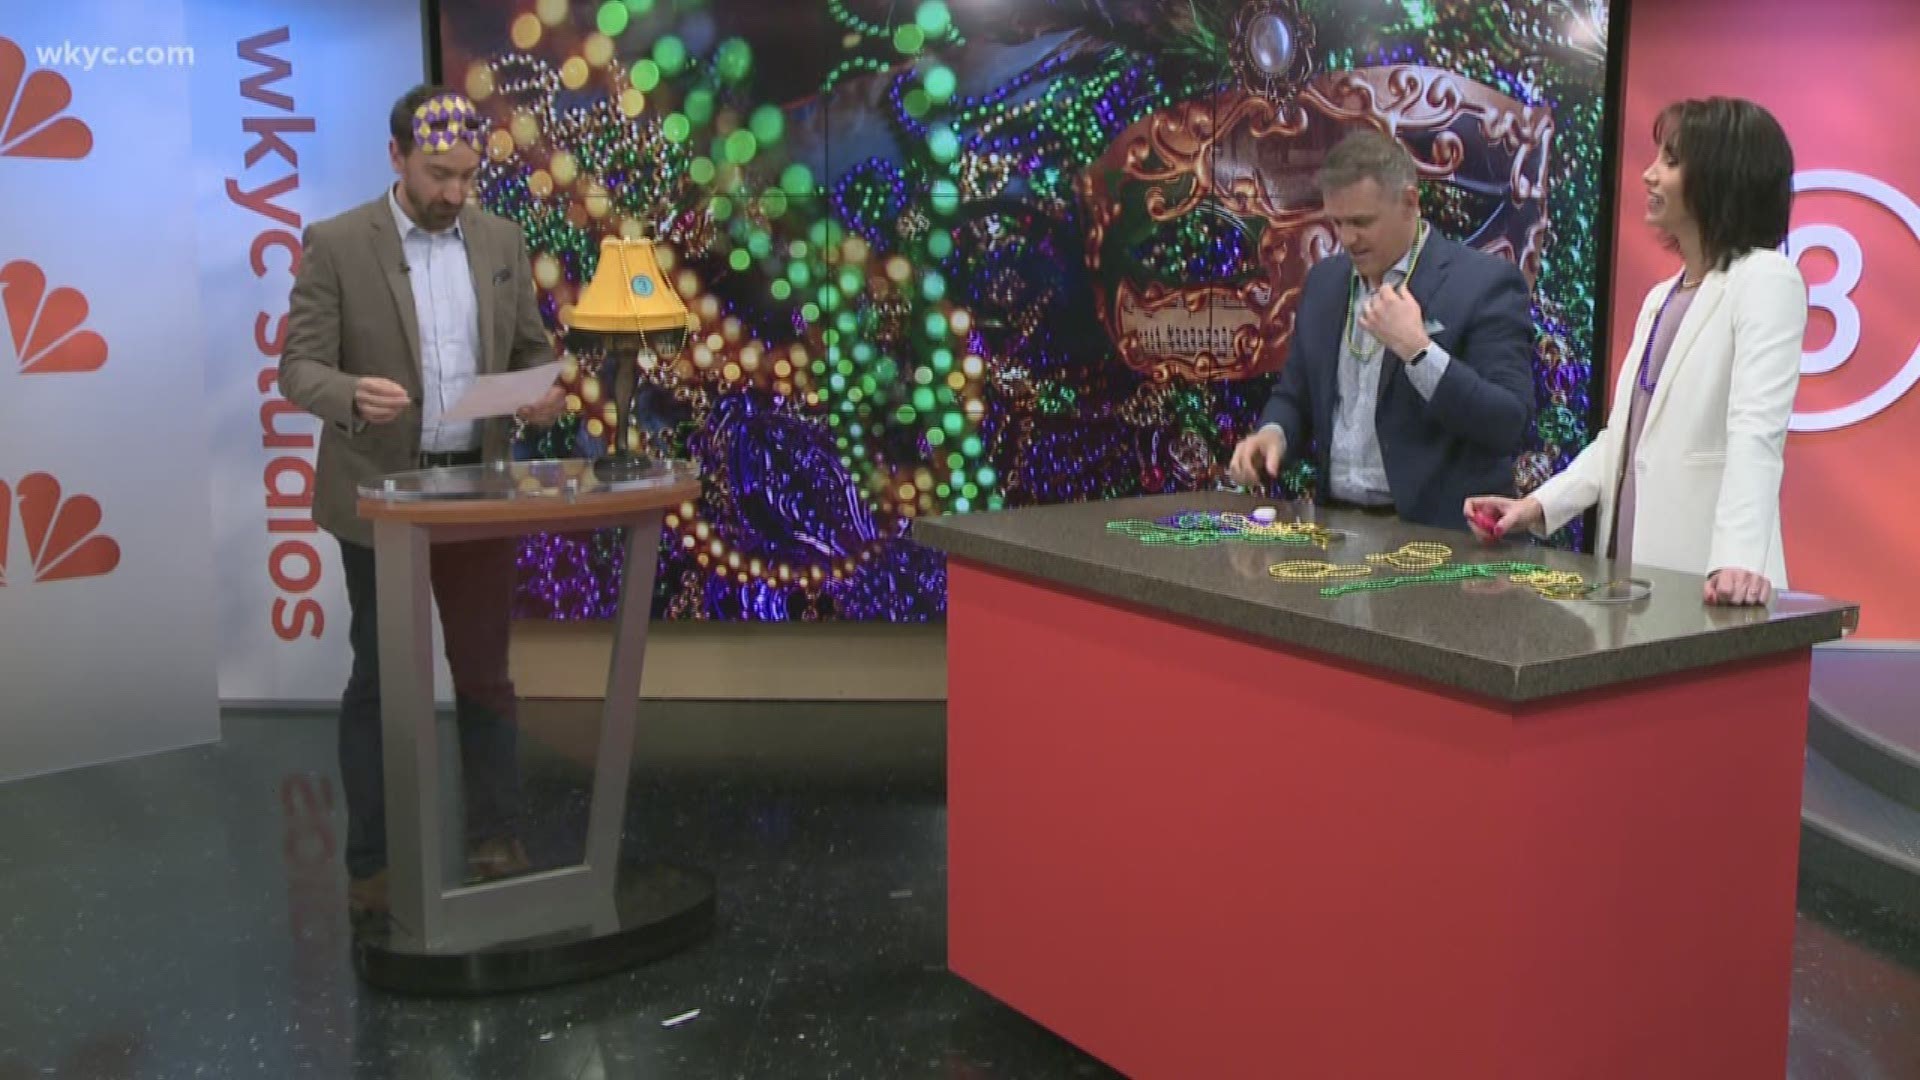 It's Trivia Tuesday and Jay and Betsy flex their Mardi Gras knowledge. Check them out everyday on What's New at 5 p.m.